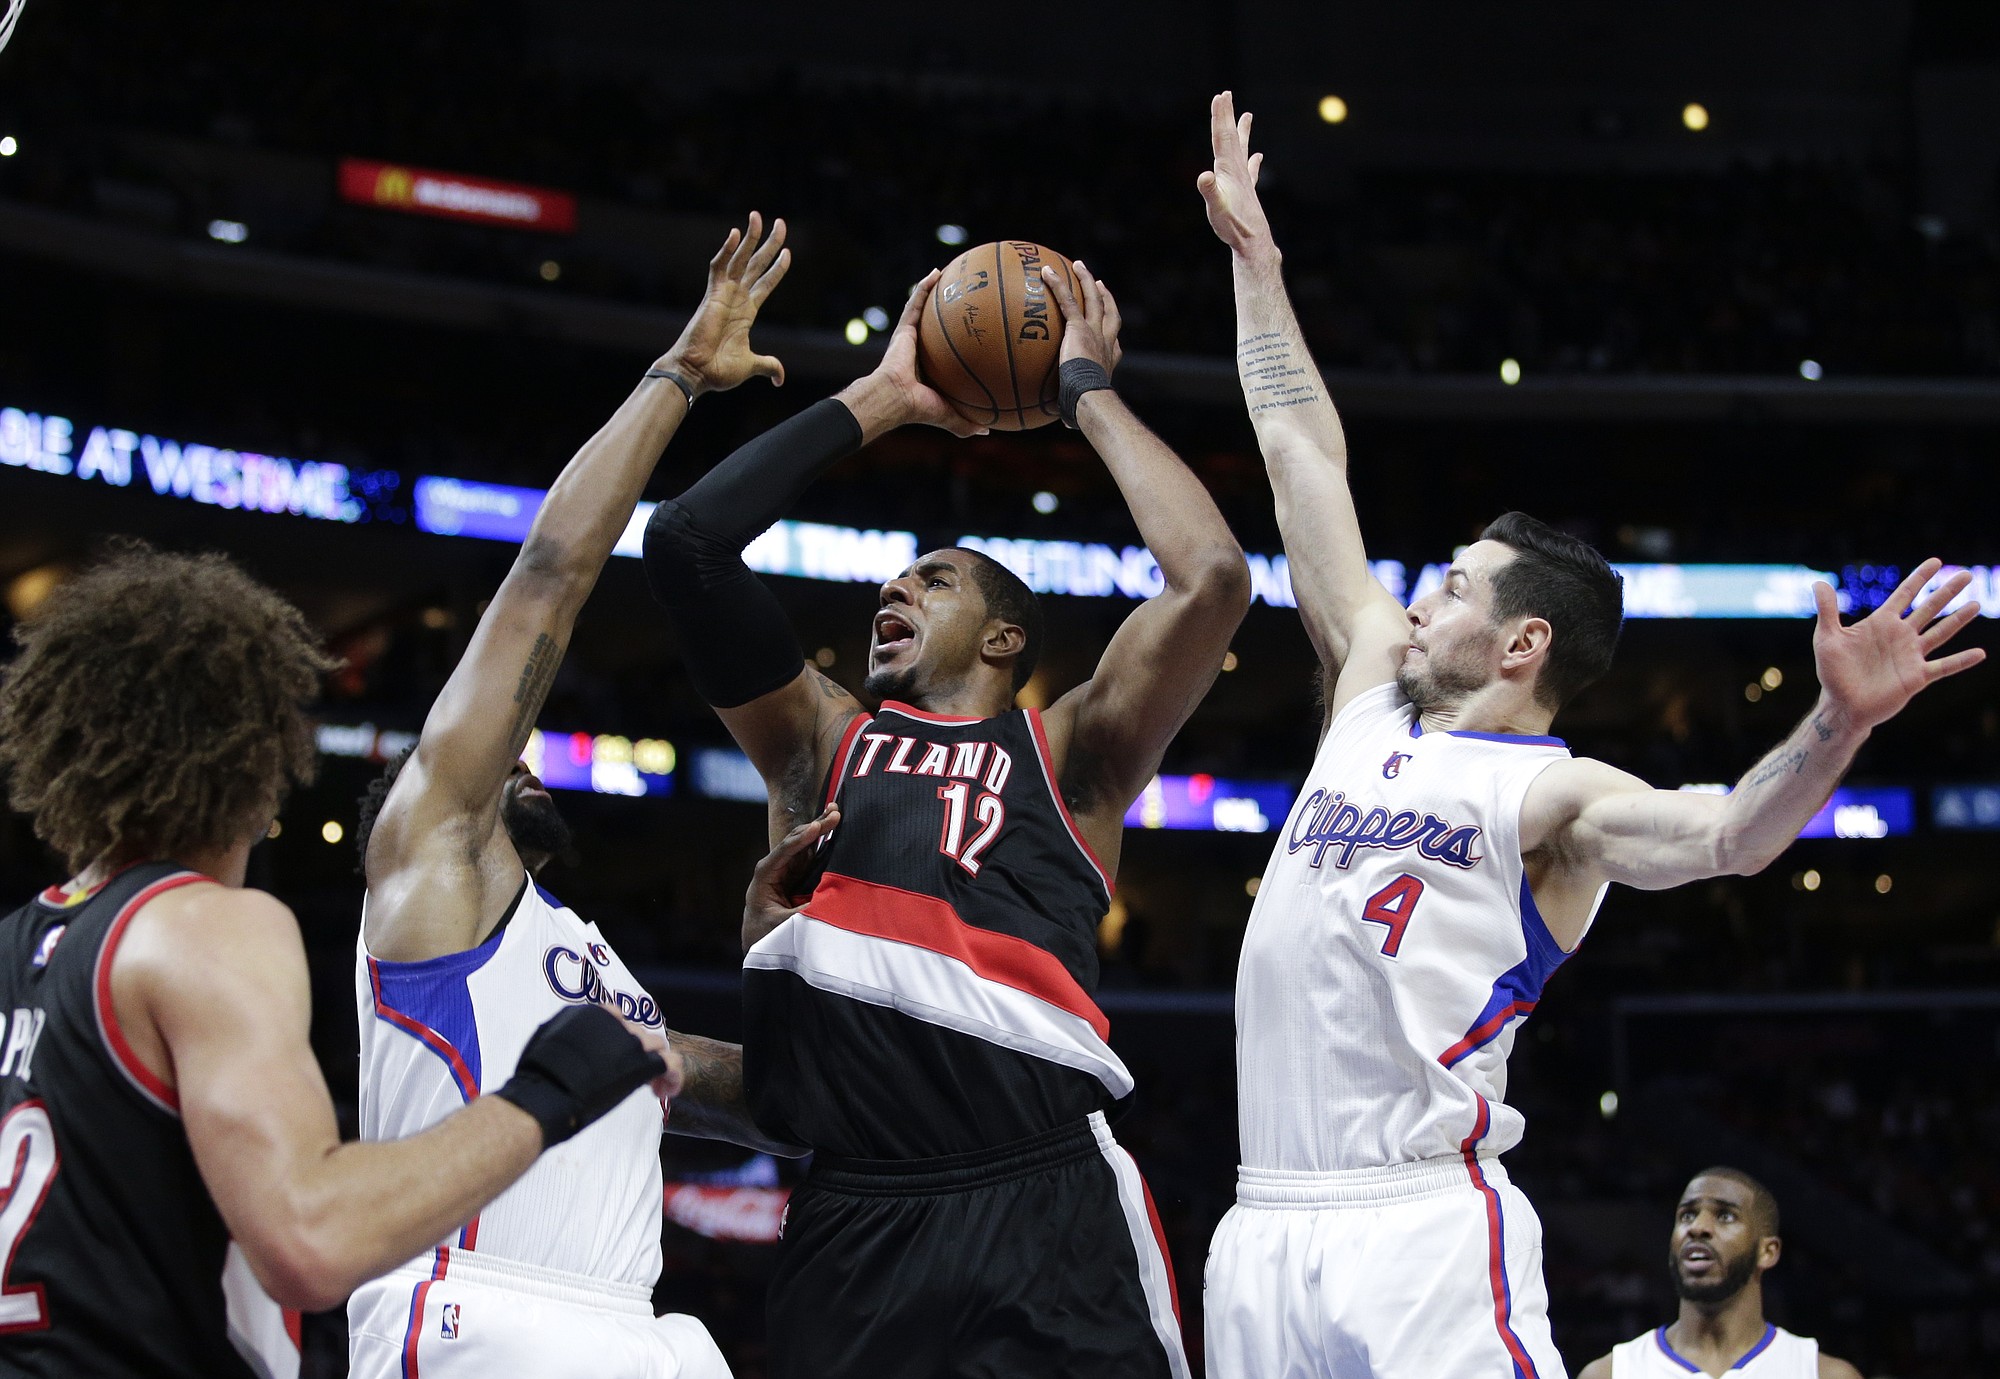 Portland Trail Blazers' LaMarcus Aldridge, center, goes up for a basket as he is defended by Los Angeles Clippers' DeAndre Jordan, left, and J.J. Redick during the second half of an NBA basketball game, Wednesday, March 4, 2015, in Los Angeles. The Trail Blazers won 98-93 in overtime. (AP Photo/Jae C.